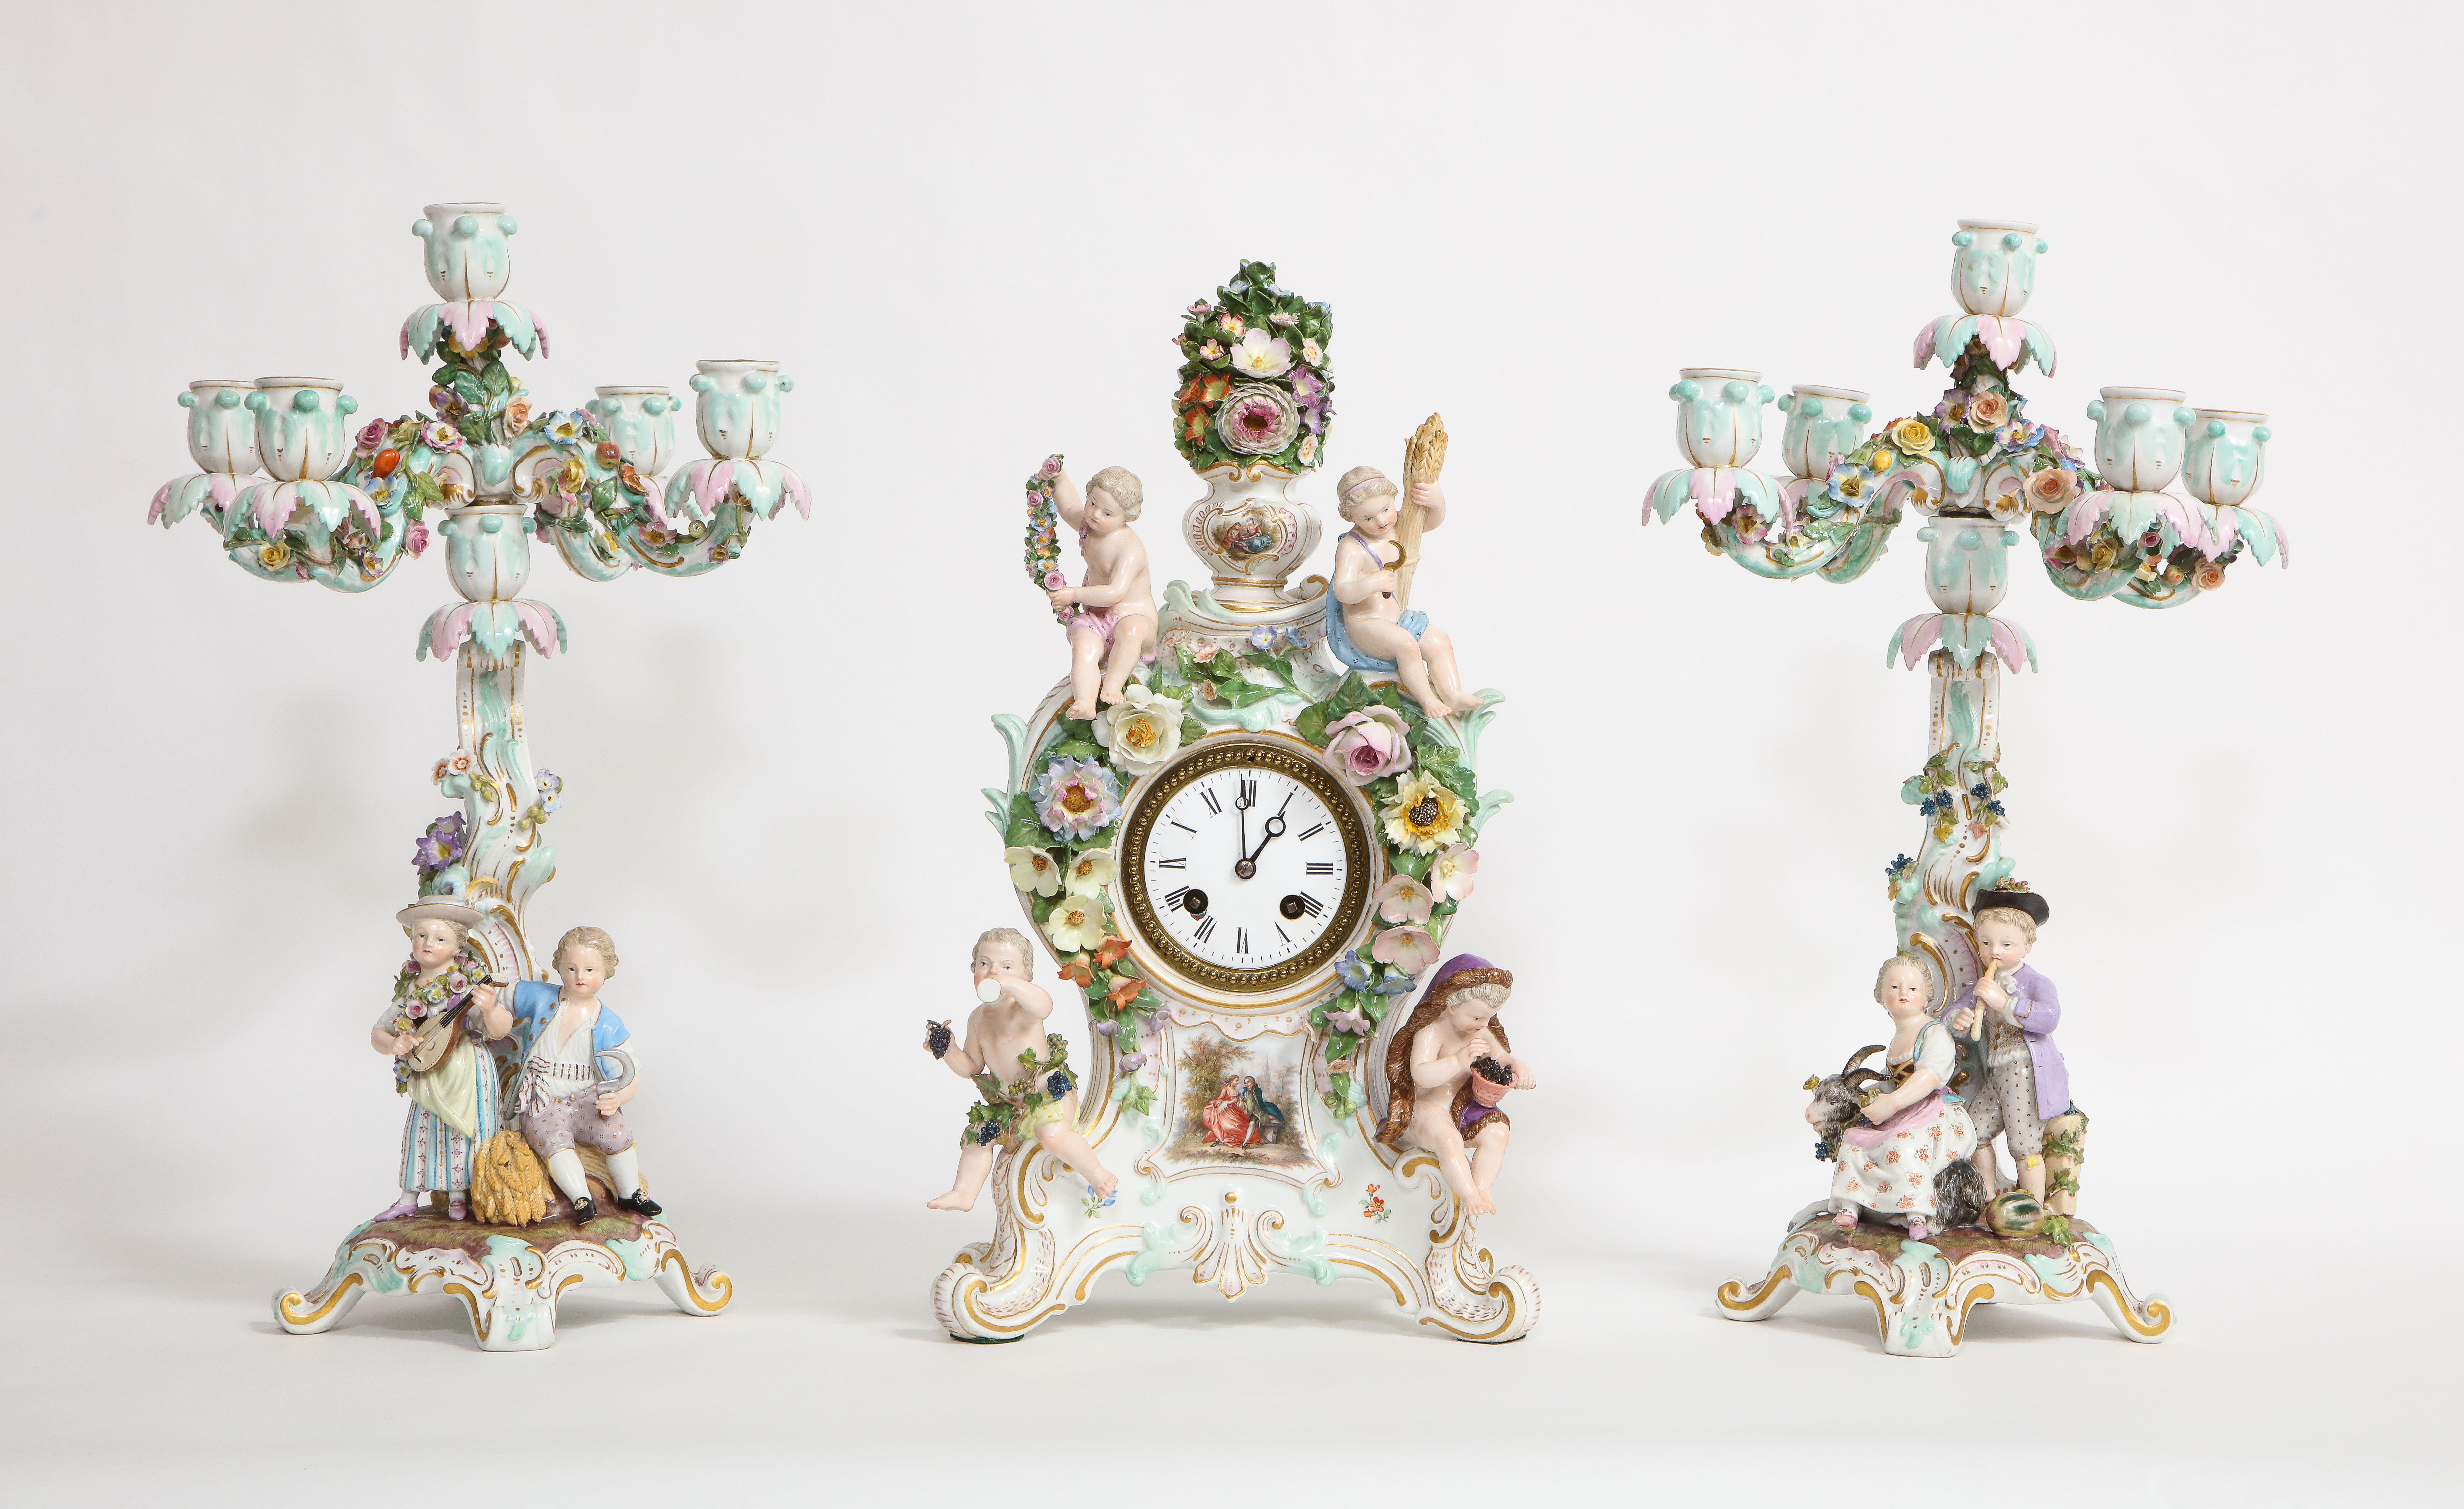 An impressive and rare 19th century Meissen Porcelain four seasons clock and Candelabra Garniture set. Comprised of three individual pieces, which include a gorgeous clock and two matching candelabras. The clock is impressive, with applied rococo